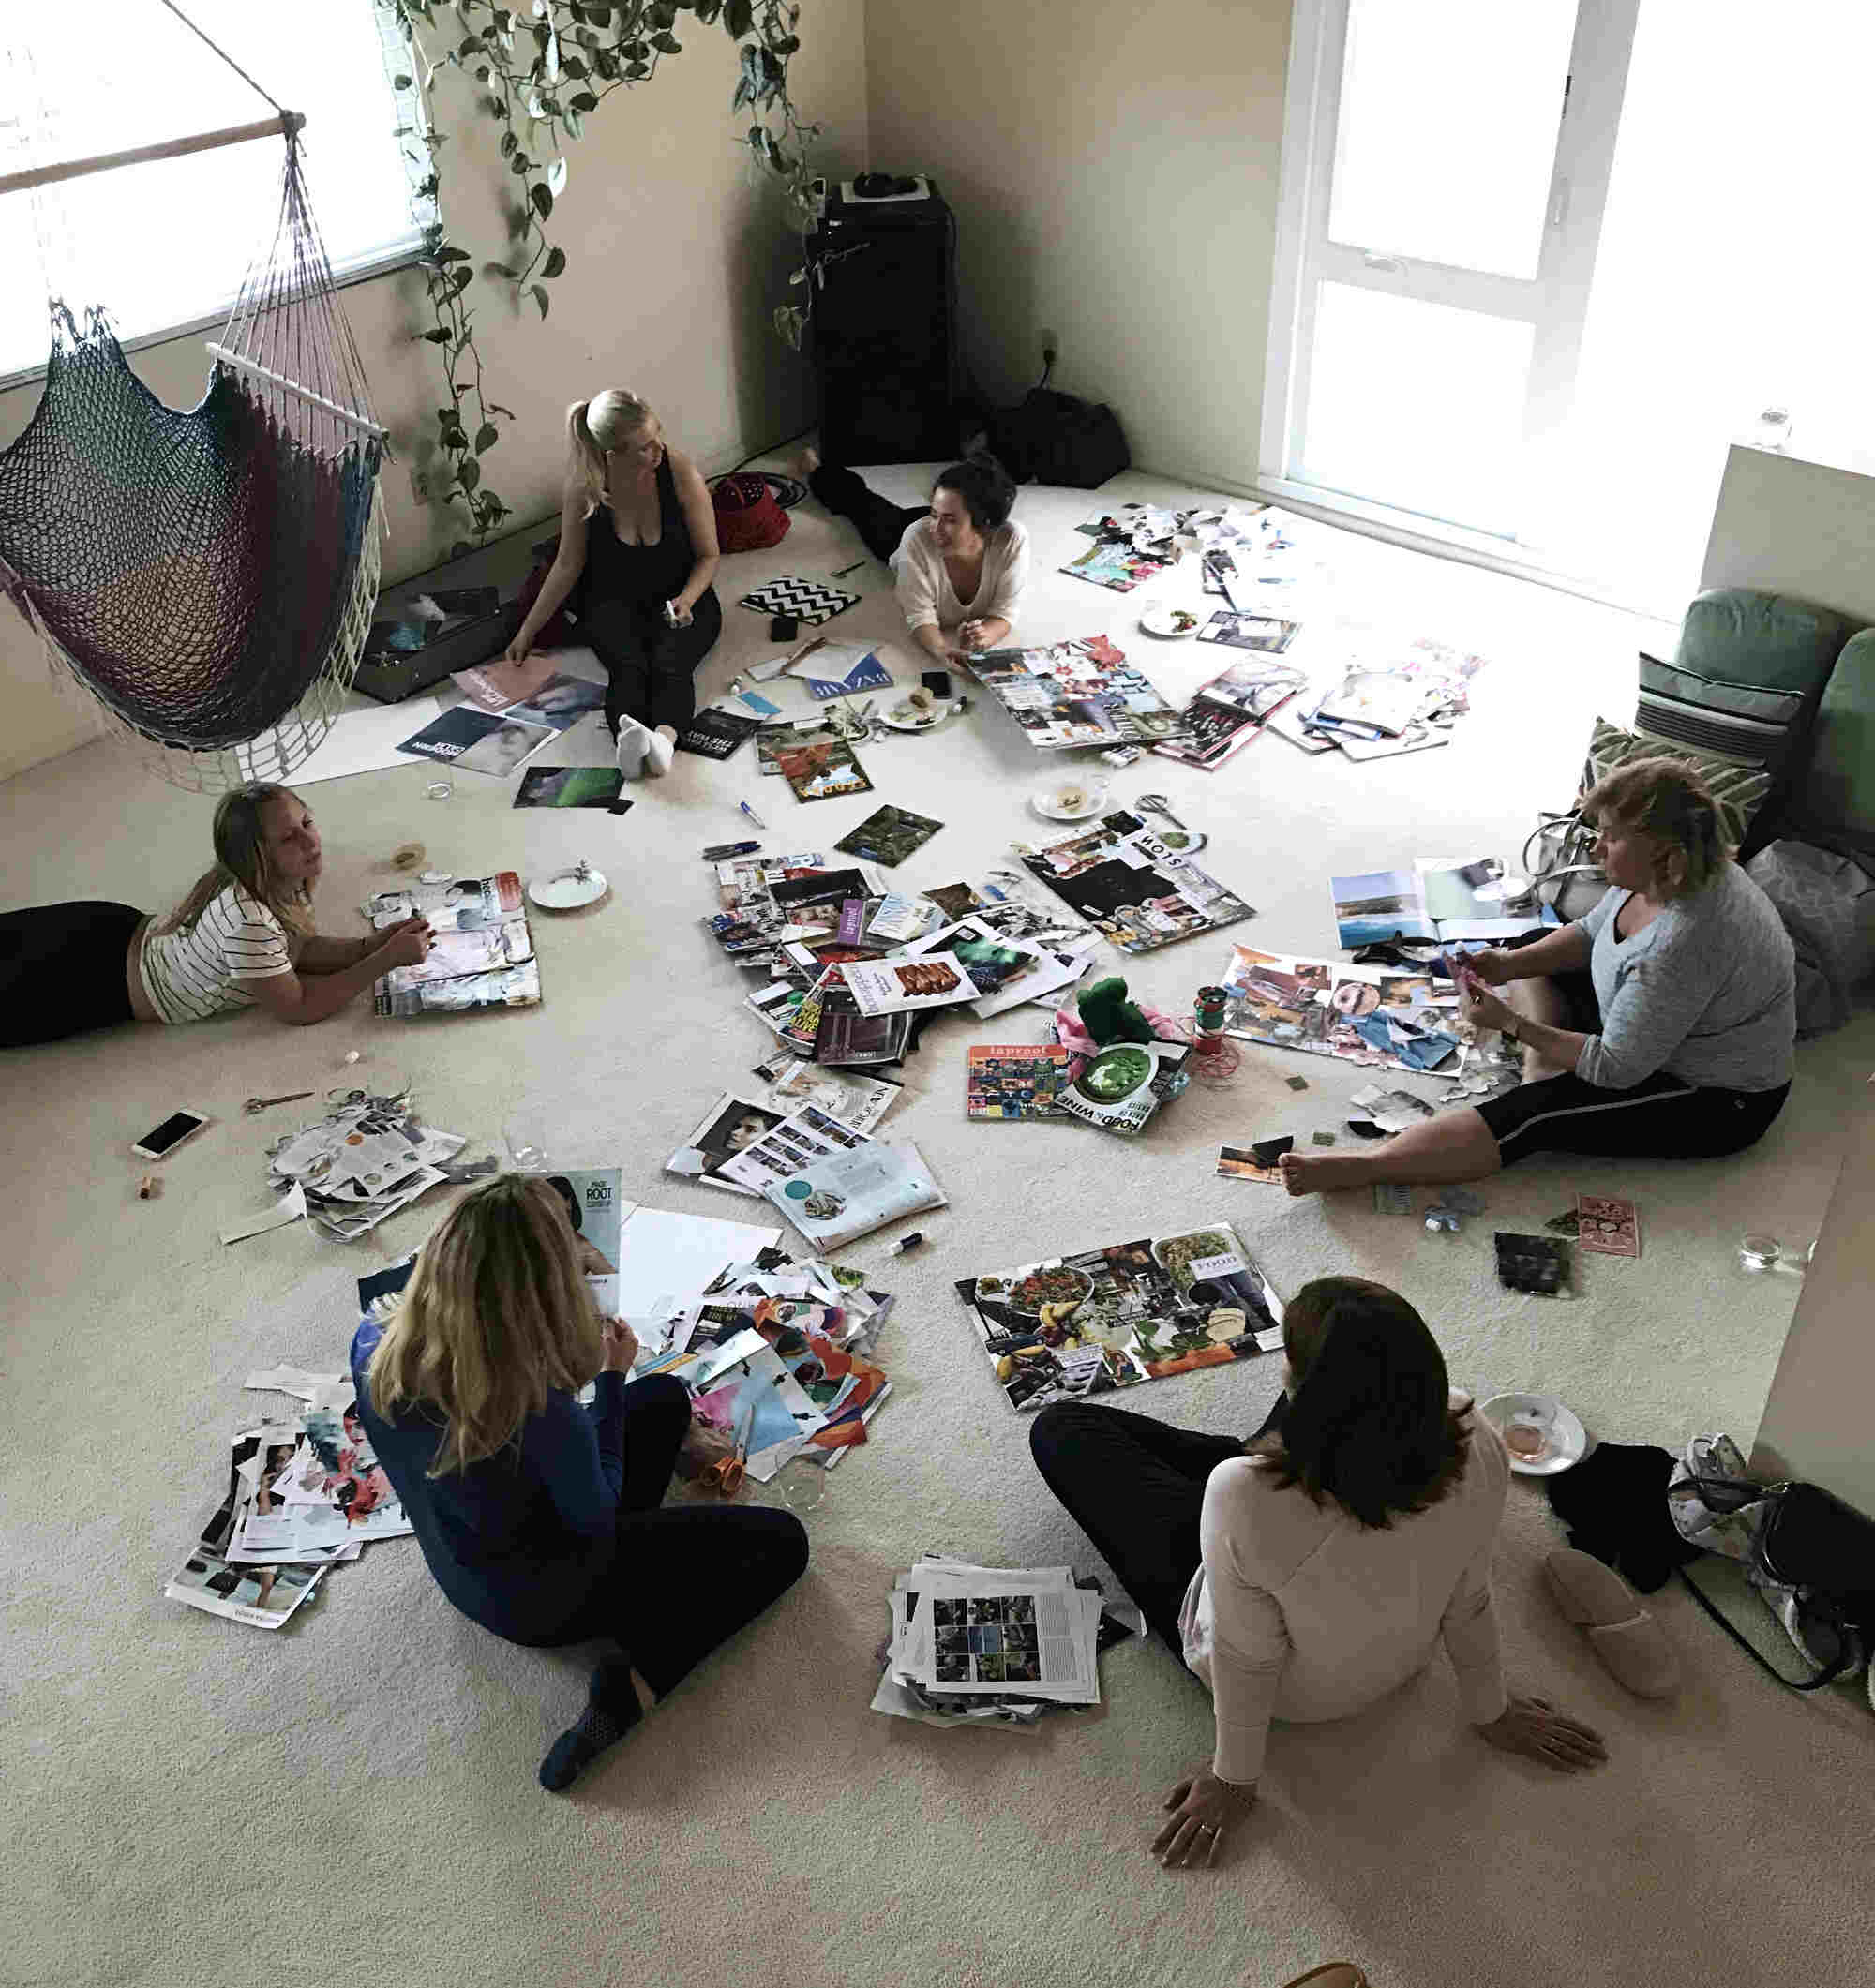 People on the floor of a room with magazines and crafts.